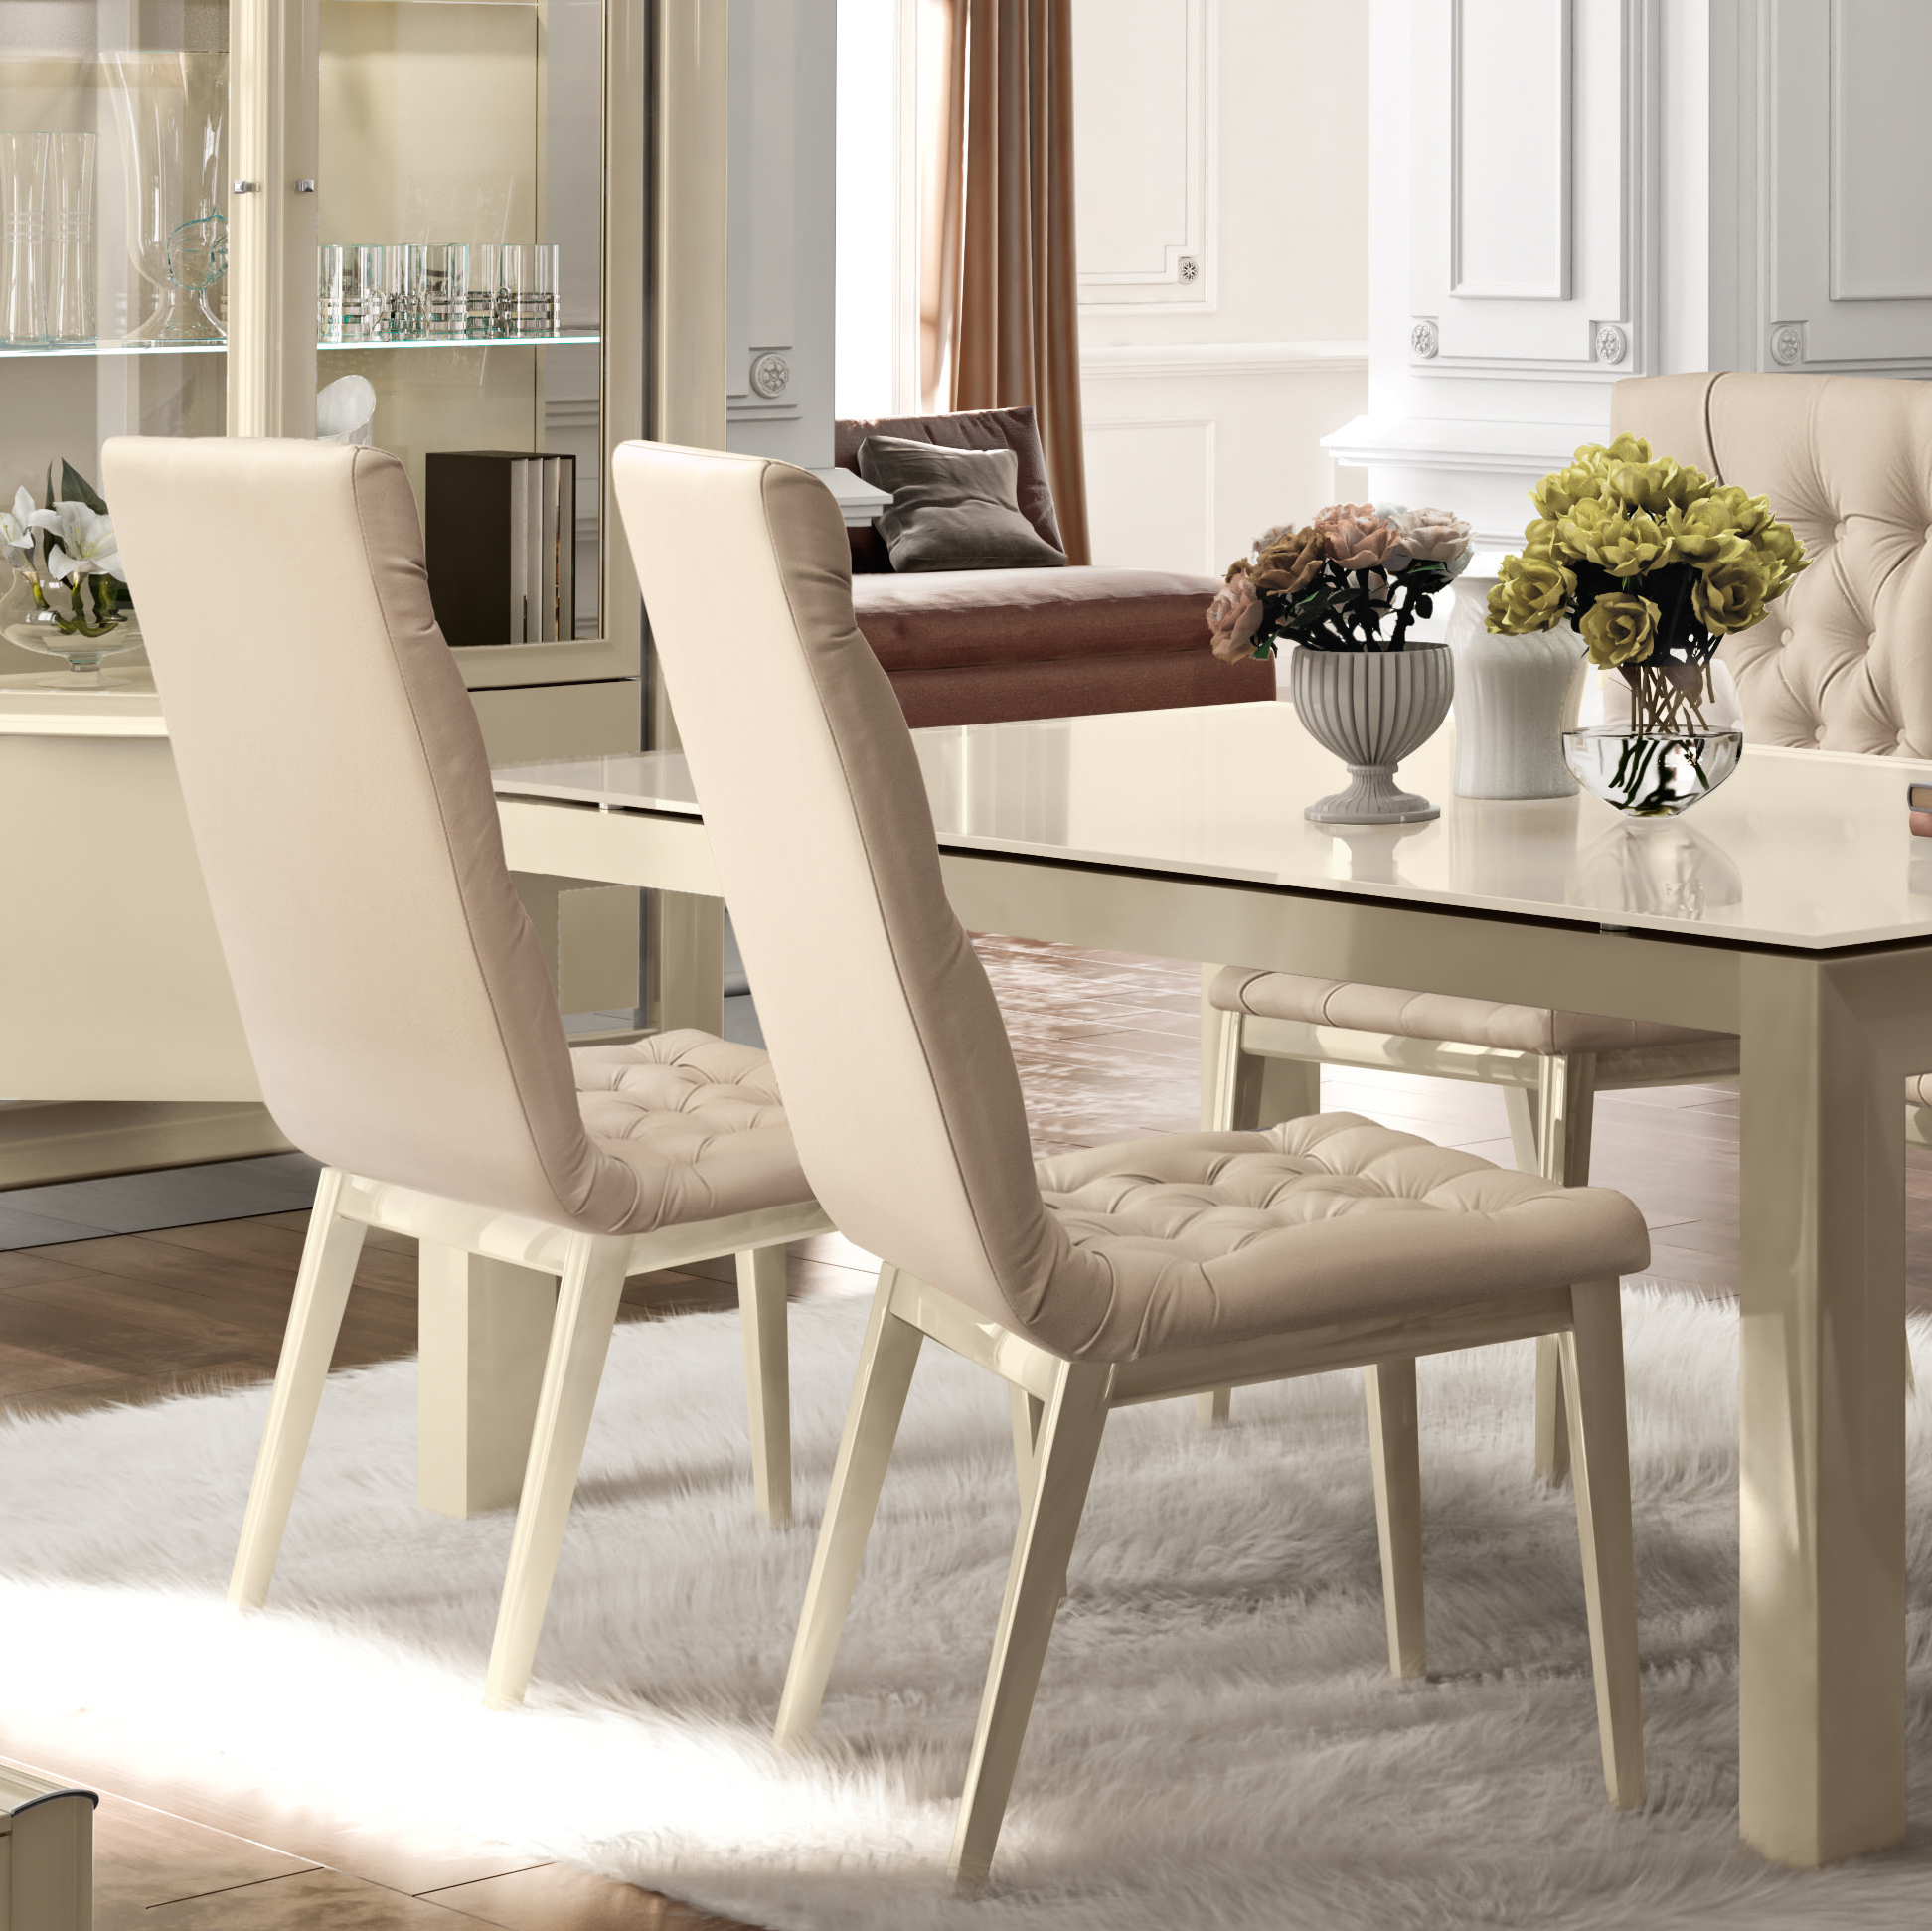 Capitonne Ivory High Gloss Dining Chair